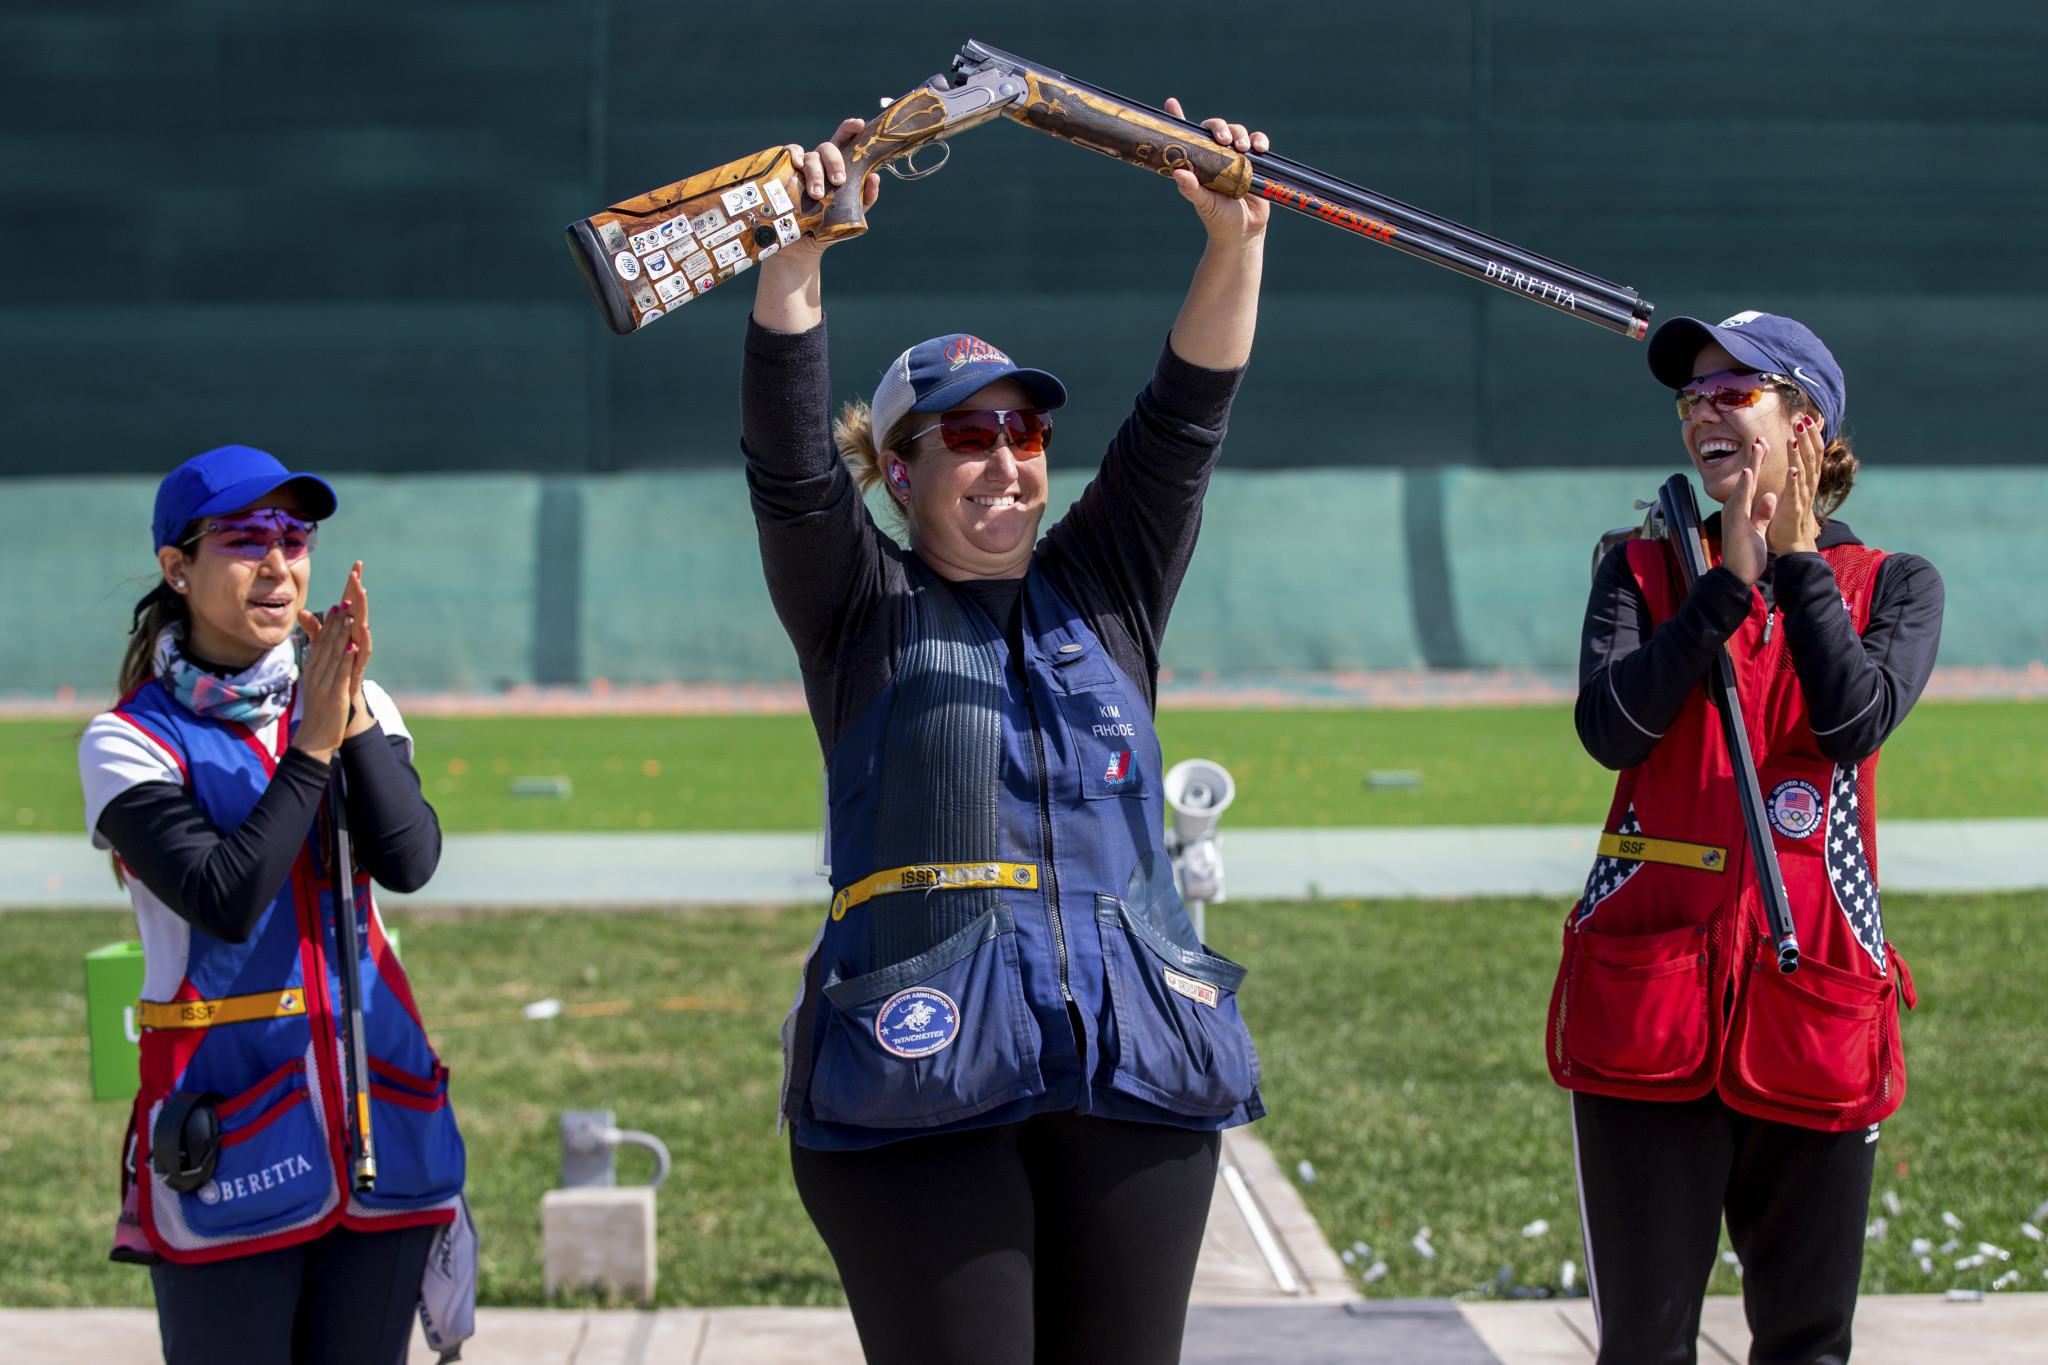 Rhode, also a three-times Olympic champion, triumphed in the women's skeet ©Lima 2019